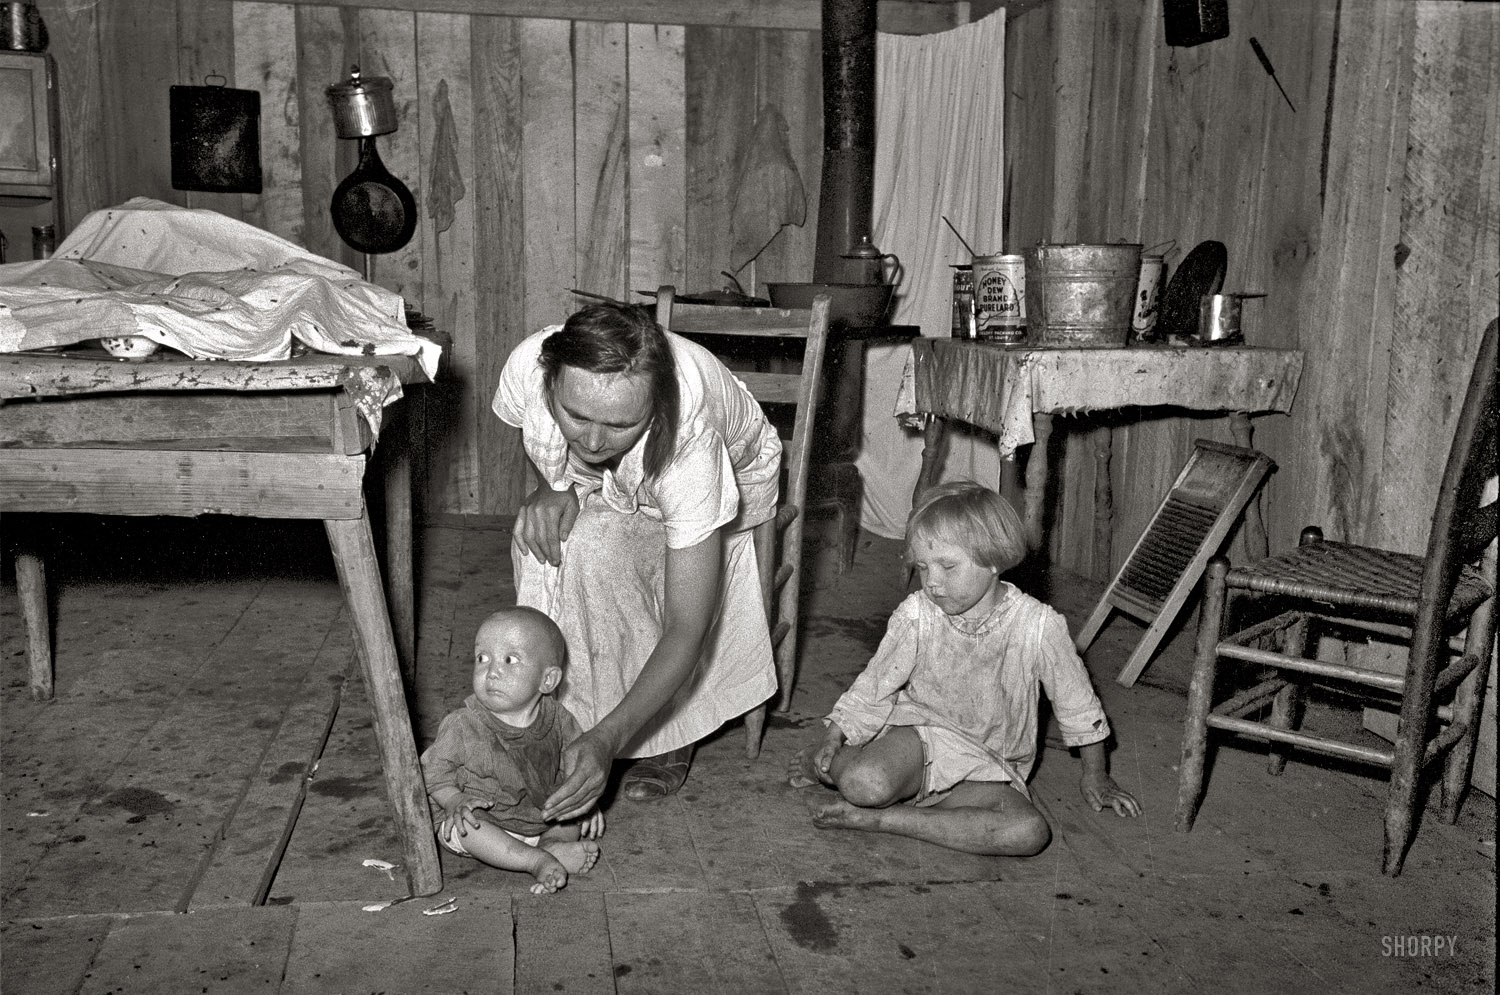 May 1938. New Madrid County, Missouri. "Interior of house without windows, home of sharecropper, cut-over farmer of Mississippi bottoms." 35mm nitrate negative by Russell Lee for the Farm Security Administration. View full size.